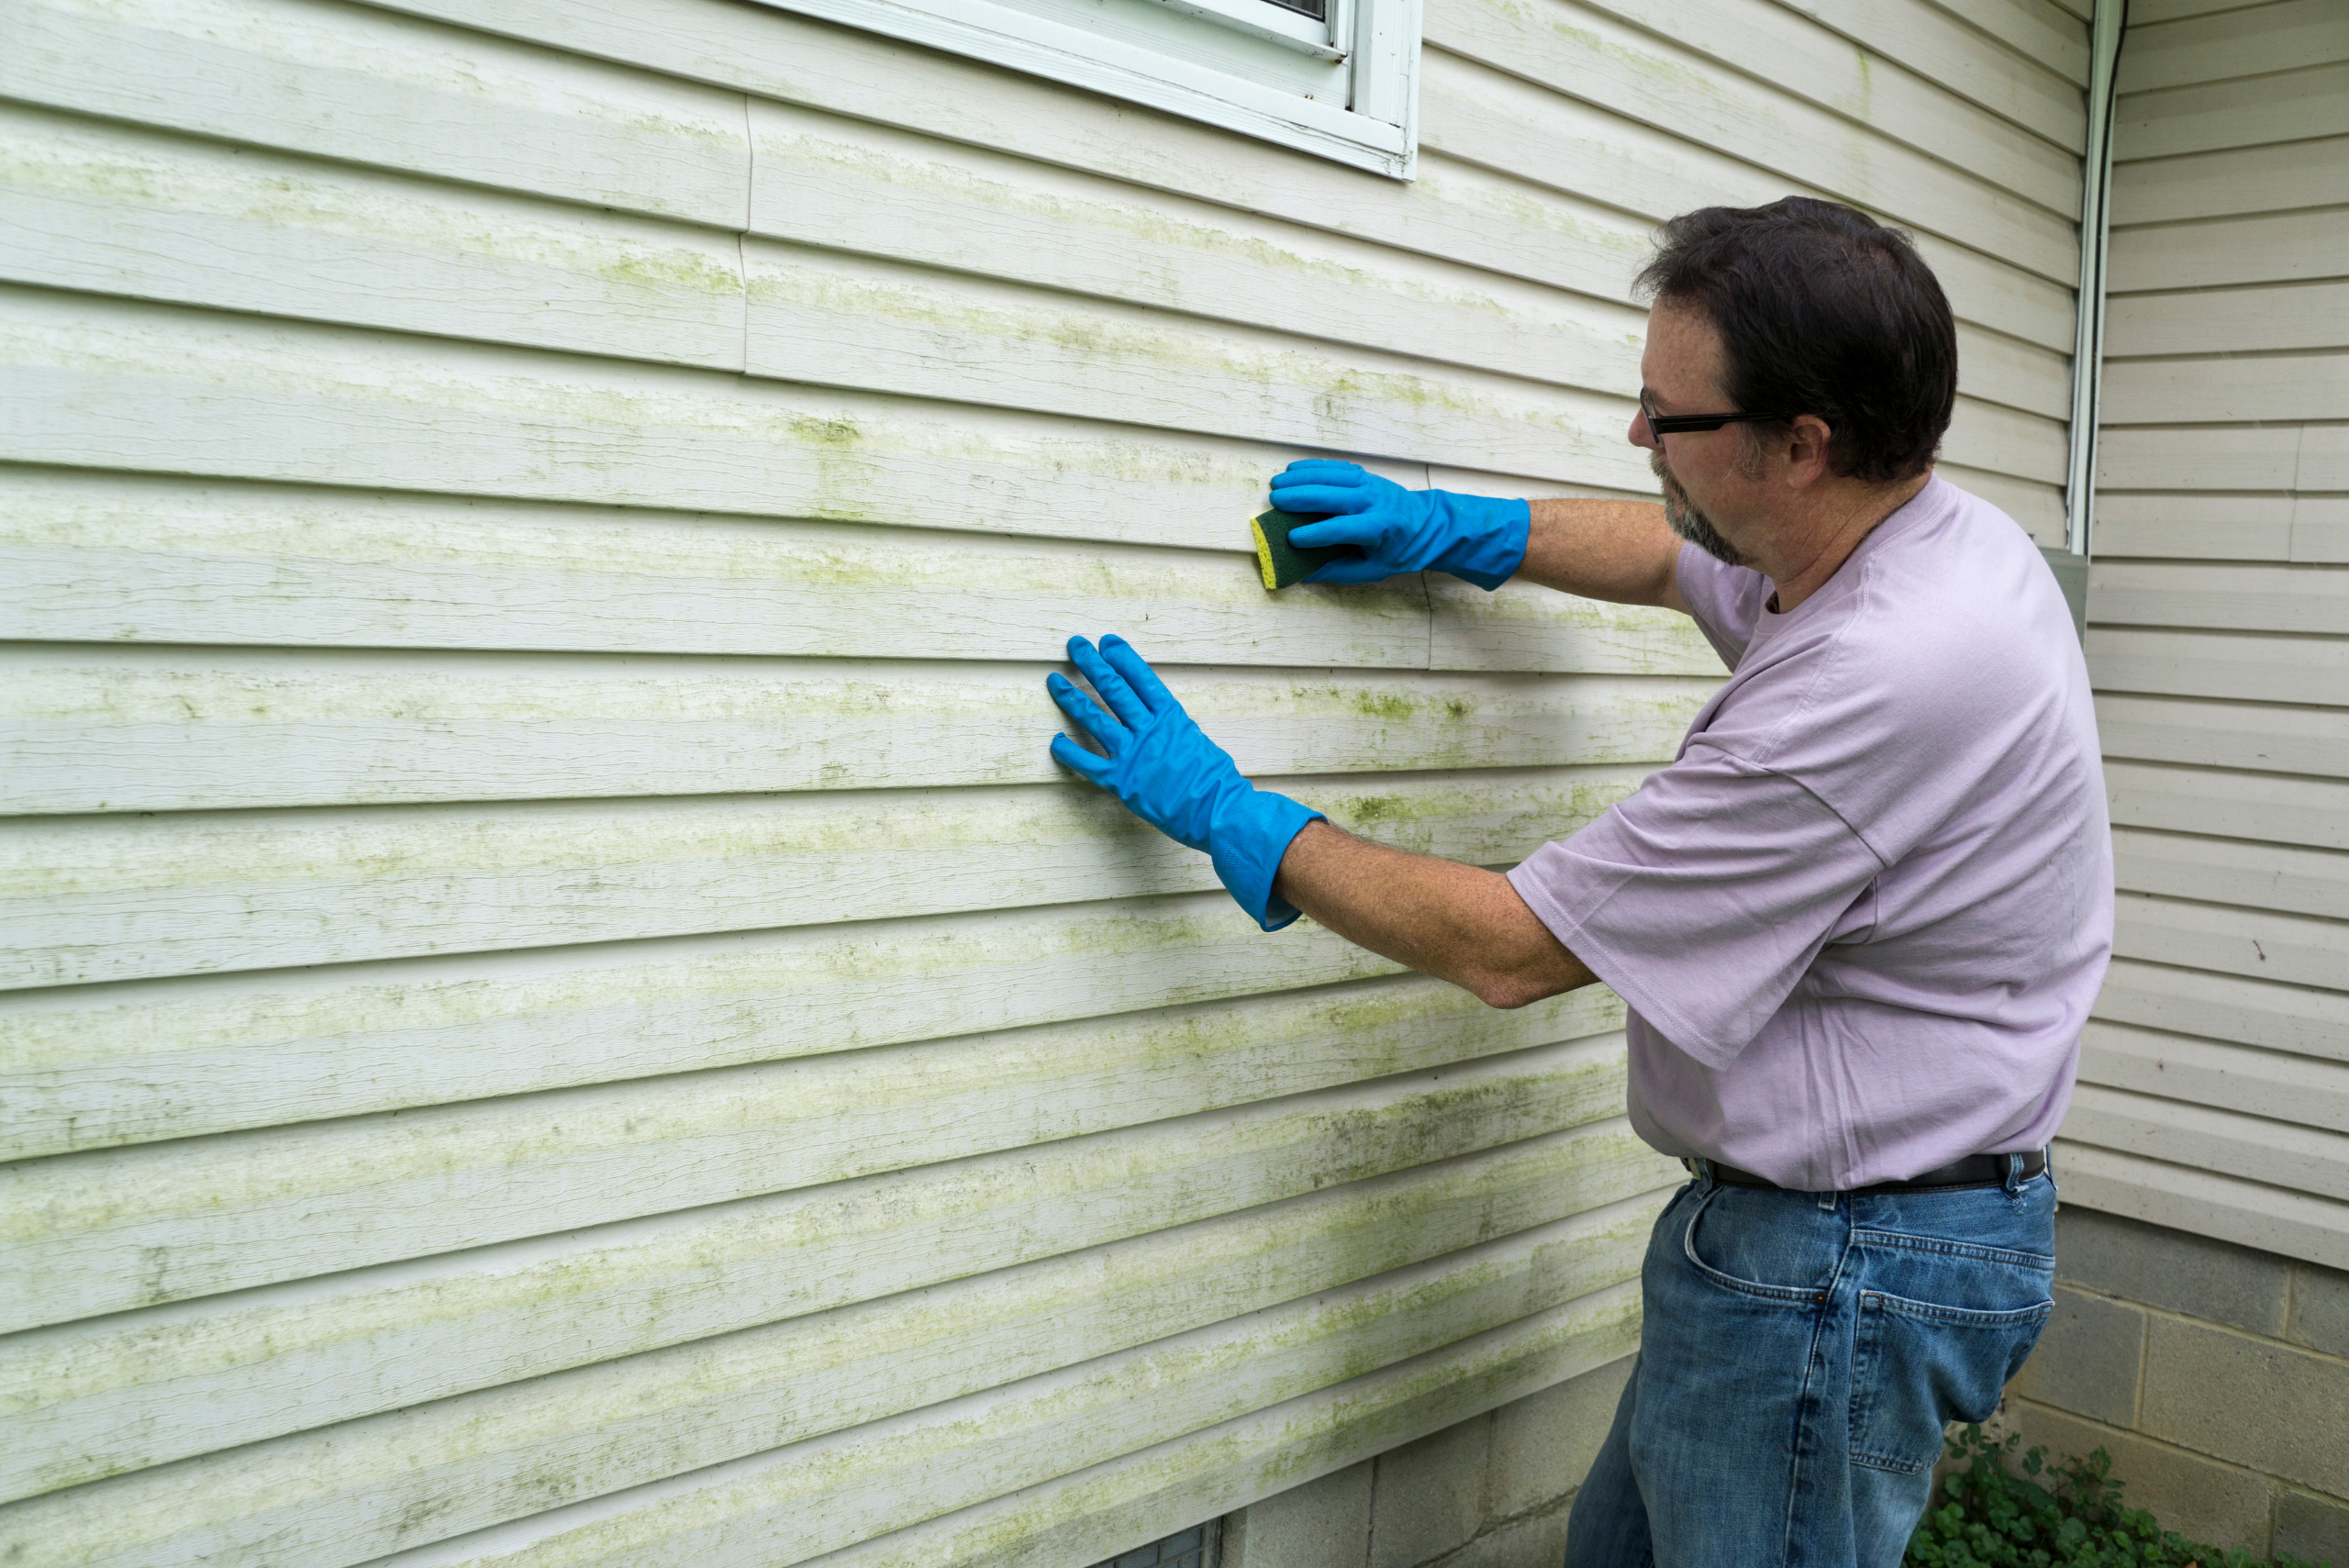 Man cleaning moss build up on the side of a house with vinyl siding.